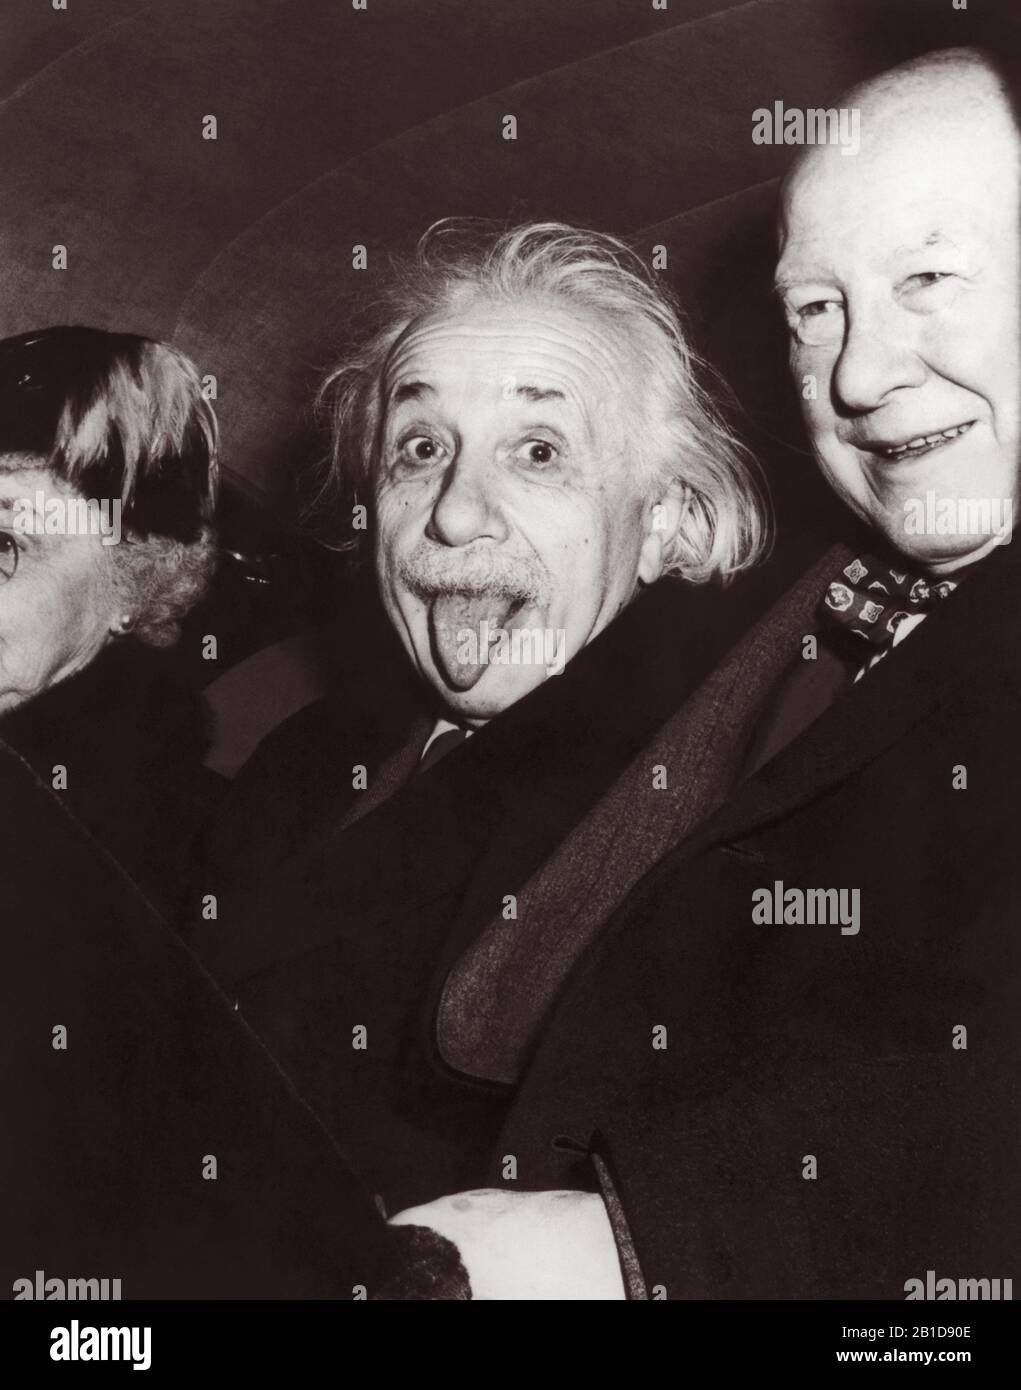 Iconic photo of Albert Einstein sticking out his tongue on the occasion of his 72nd birthday party at Princeton University on March 14, 1951. Photographer Arthur Sasse captured the split-second image as Einstein was leaving the event, seated in the back seat of a car between Dr. Frank Aydelotte, former head of the Institute for Advanced Study at Princeton University, and Aydelotte's wife, Marie Jeanette. Stock Photo